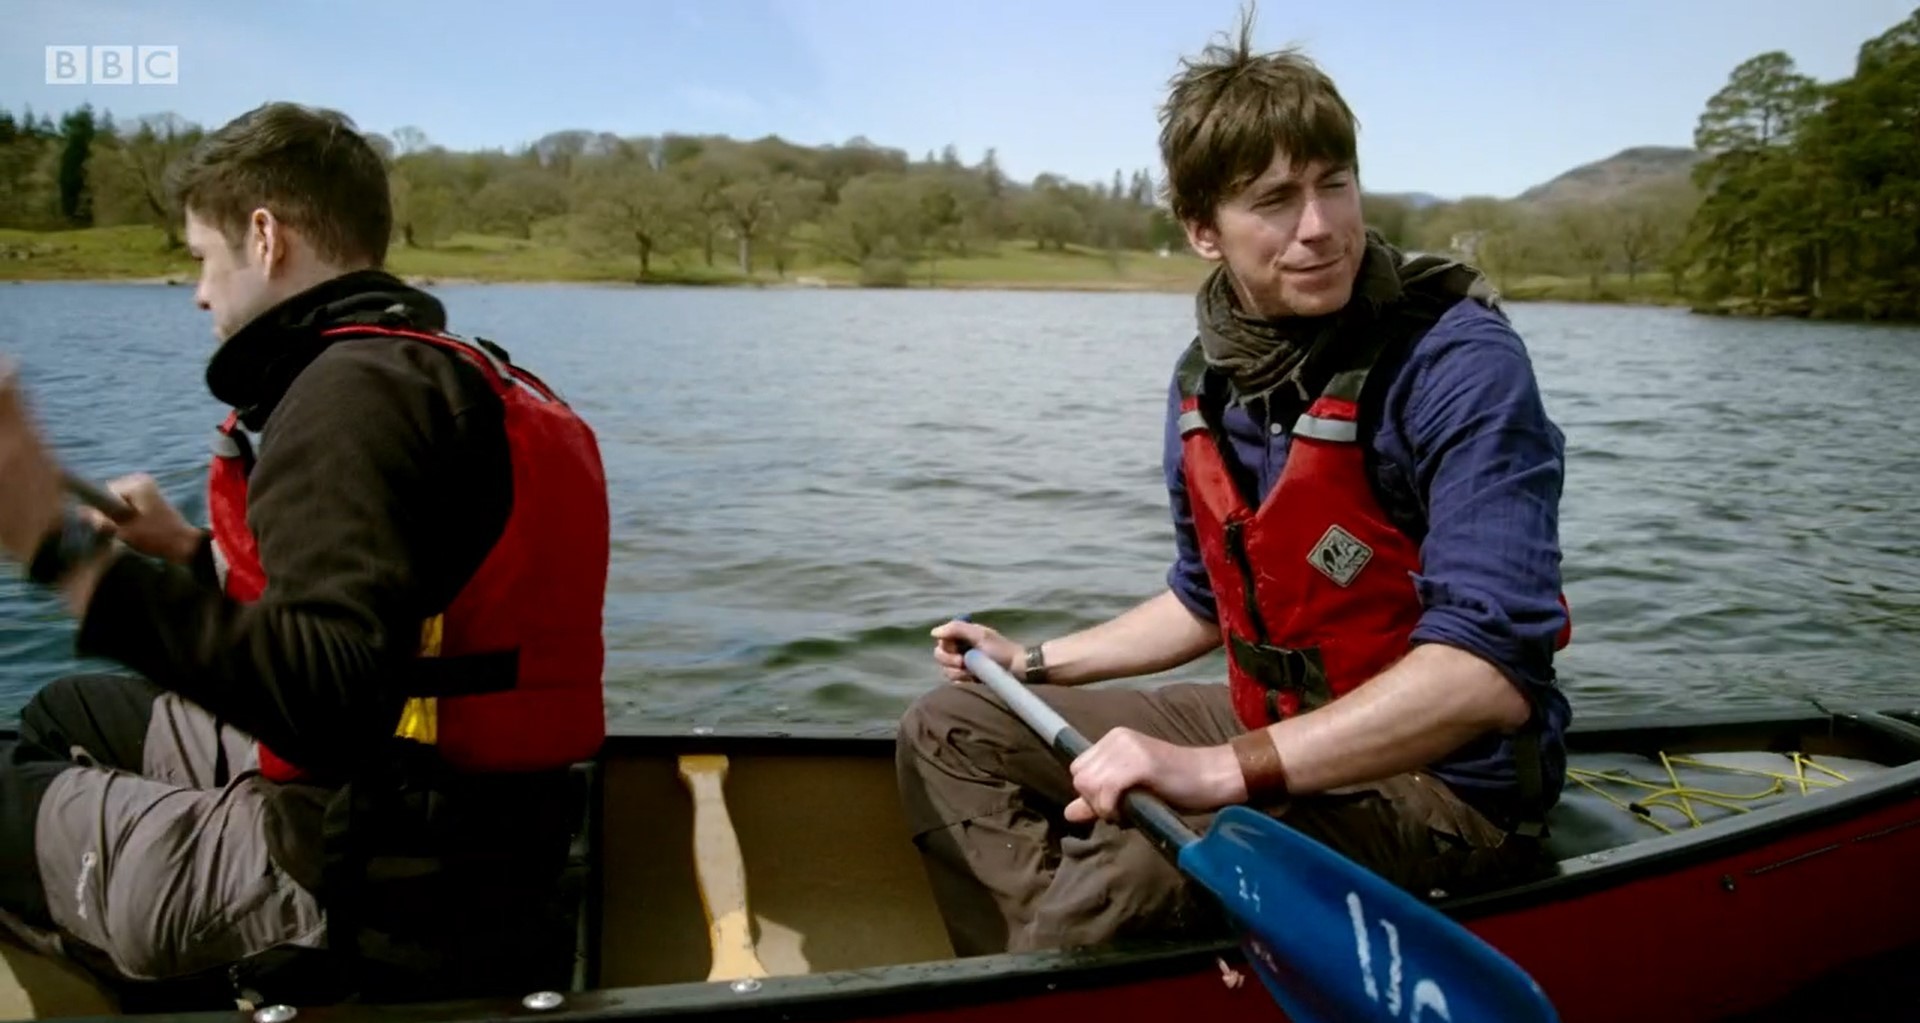 ACTIVITY: Simon Reeve with Barrow youth group on Windermere